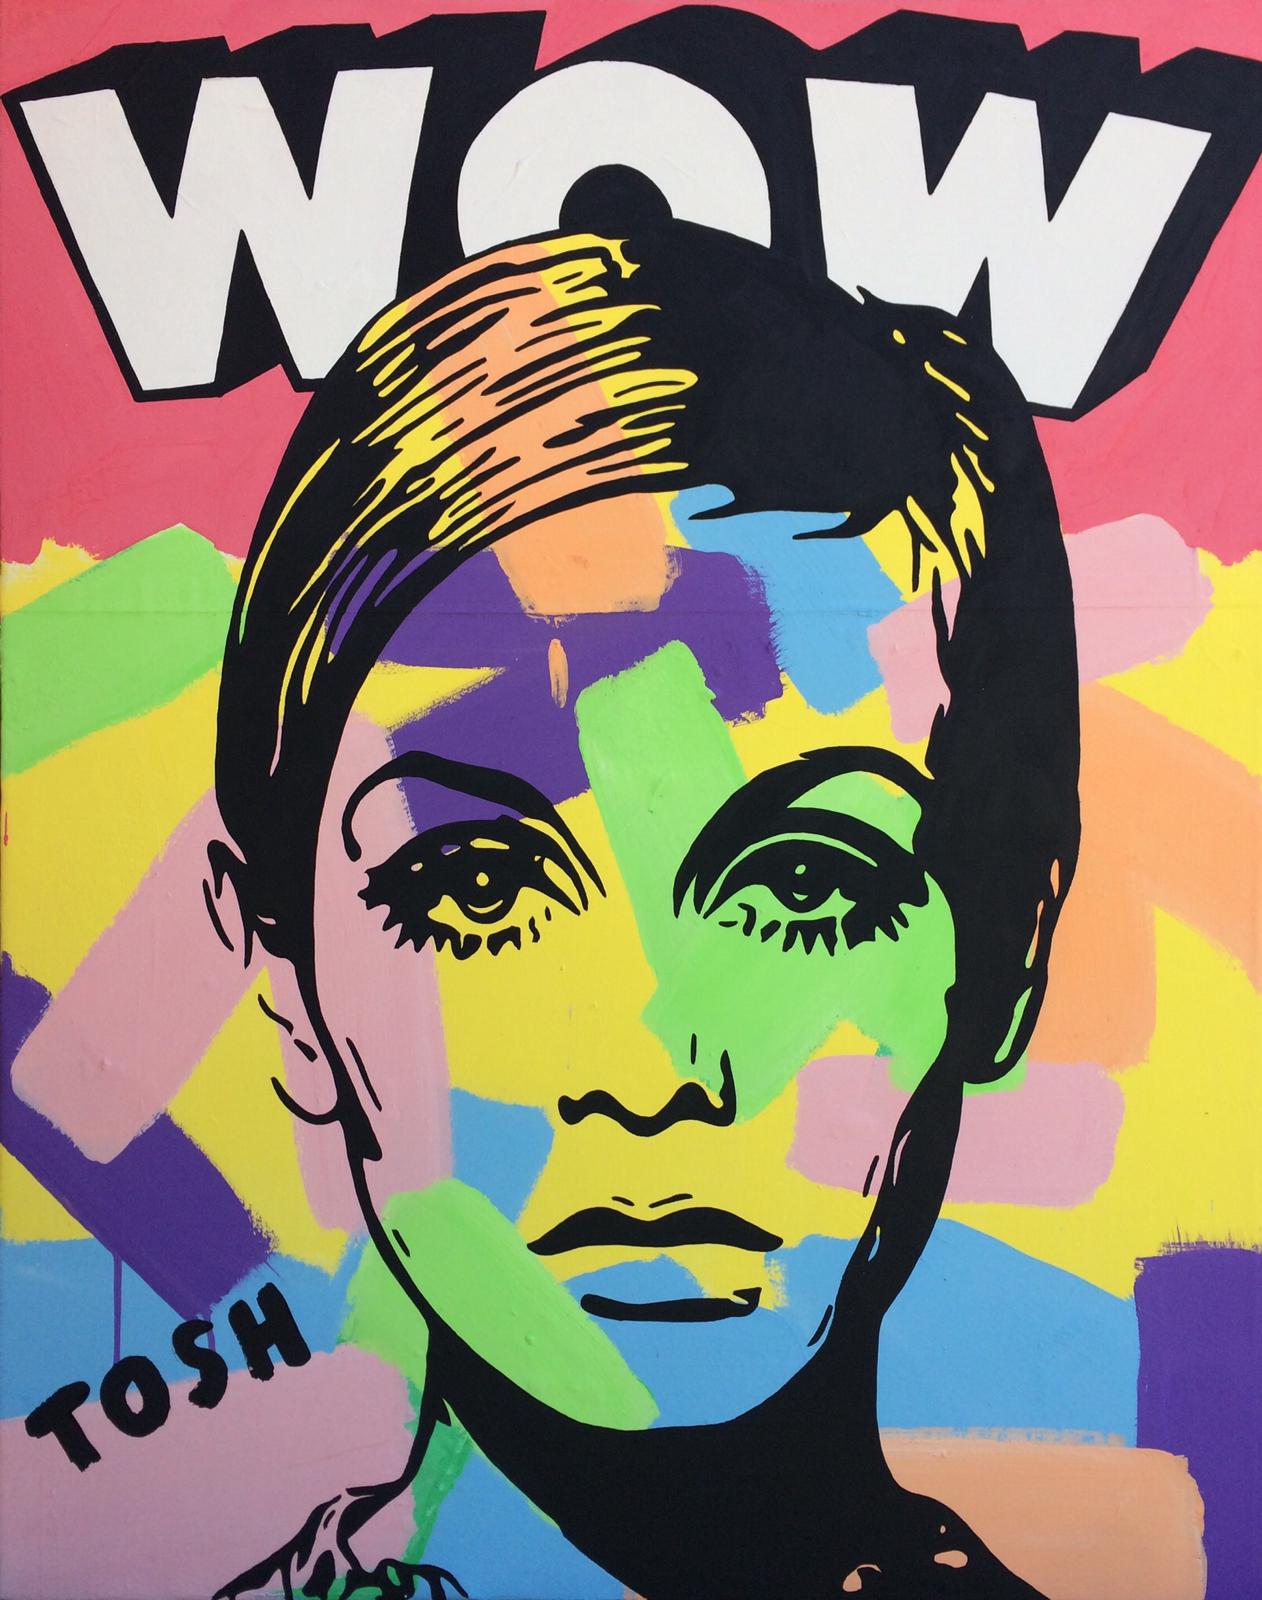 "Wow" - inches 39x31 - Tosh Andrew